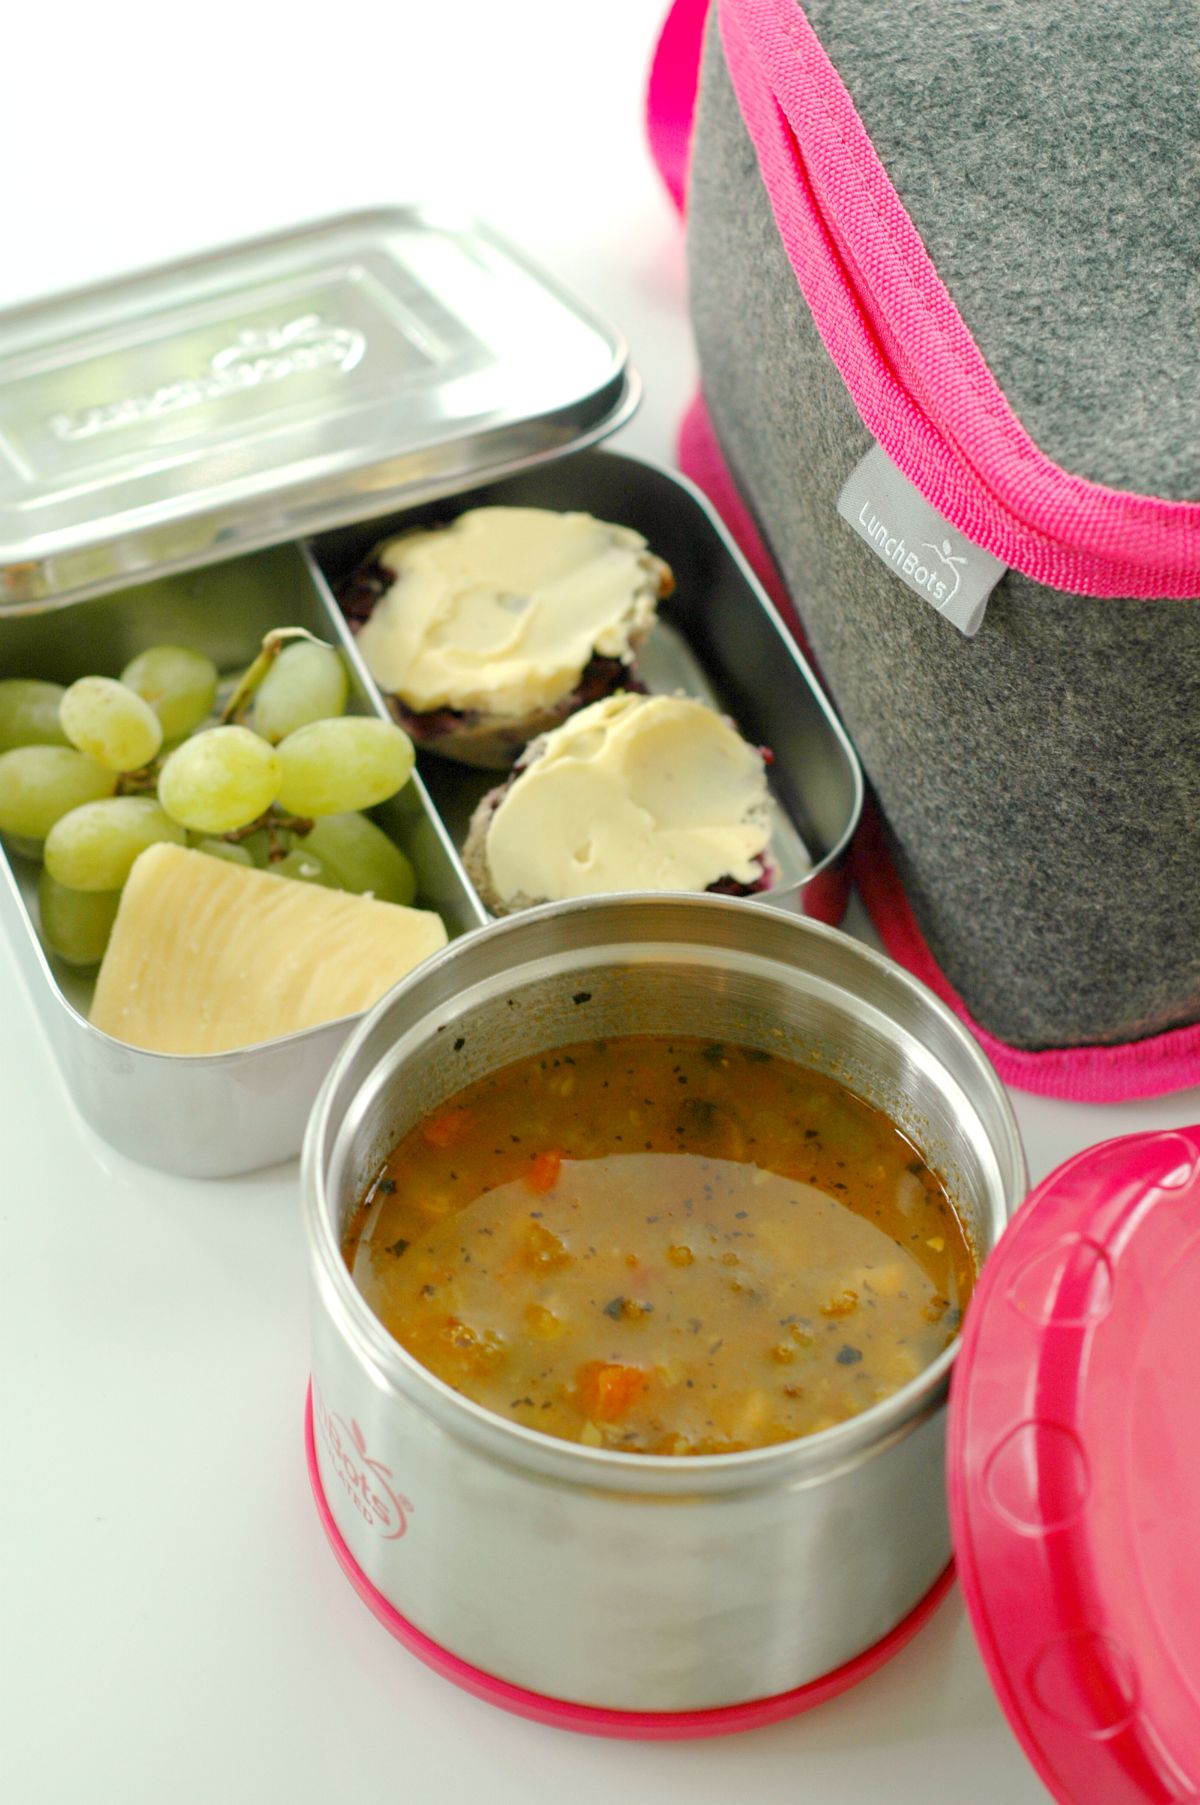 School Lunch Gear Resource Guide :: A detailed brand comparison so you can find out what works with how YOU pack lunches!